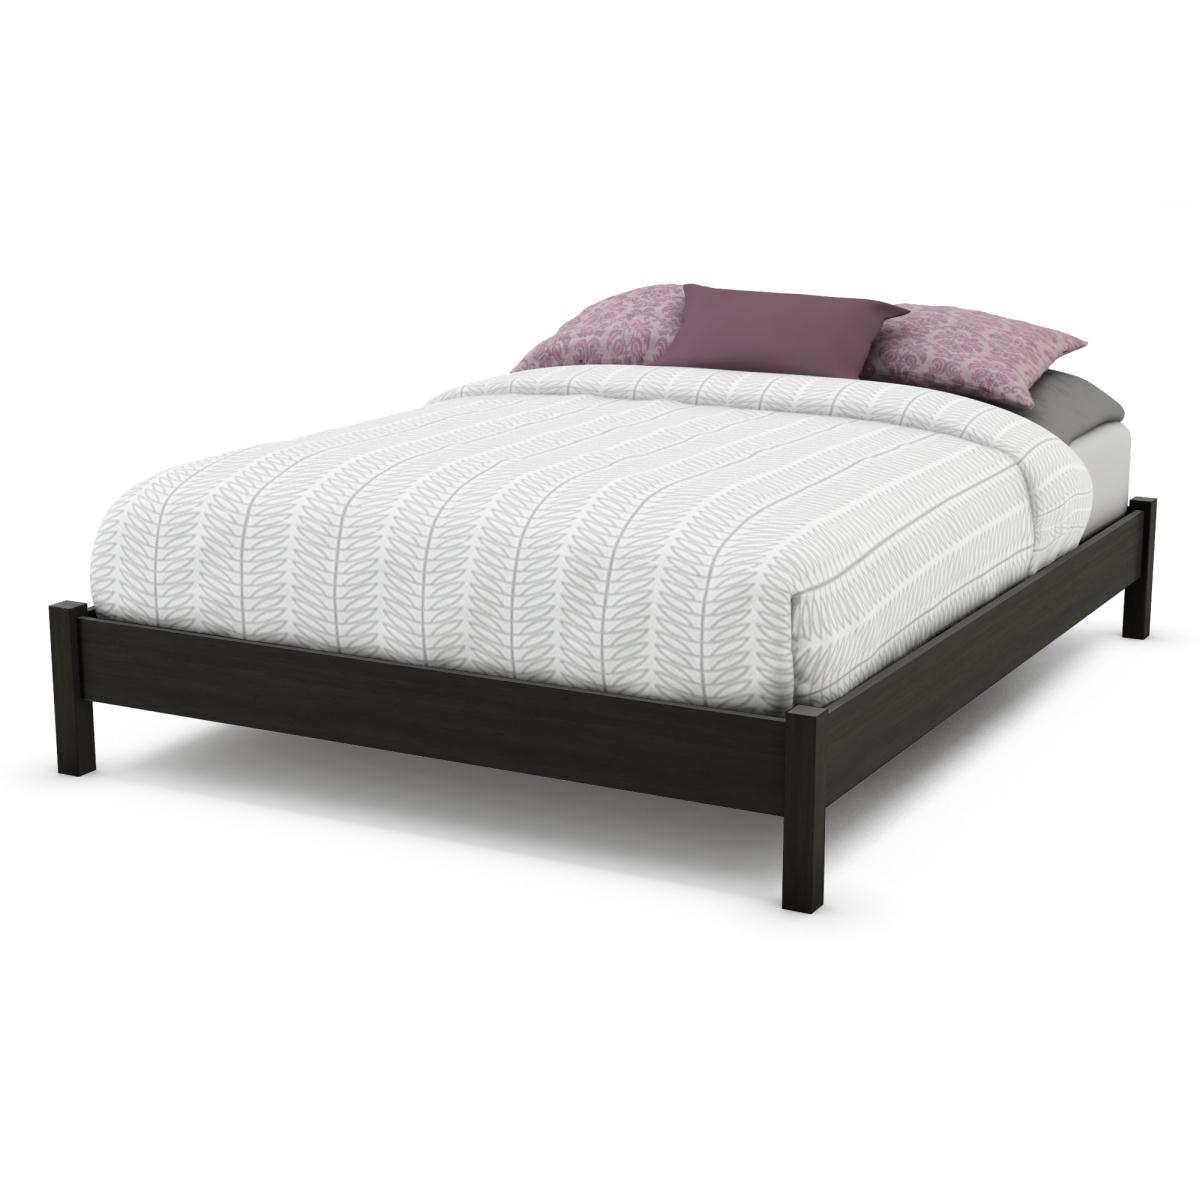 South Shore Gravity Queen Platform Bed and Bed Frame - Ebony